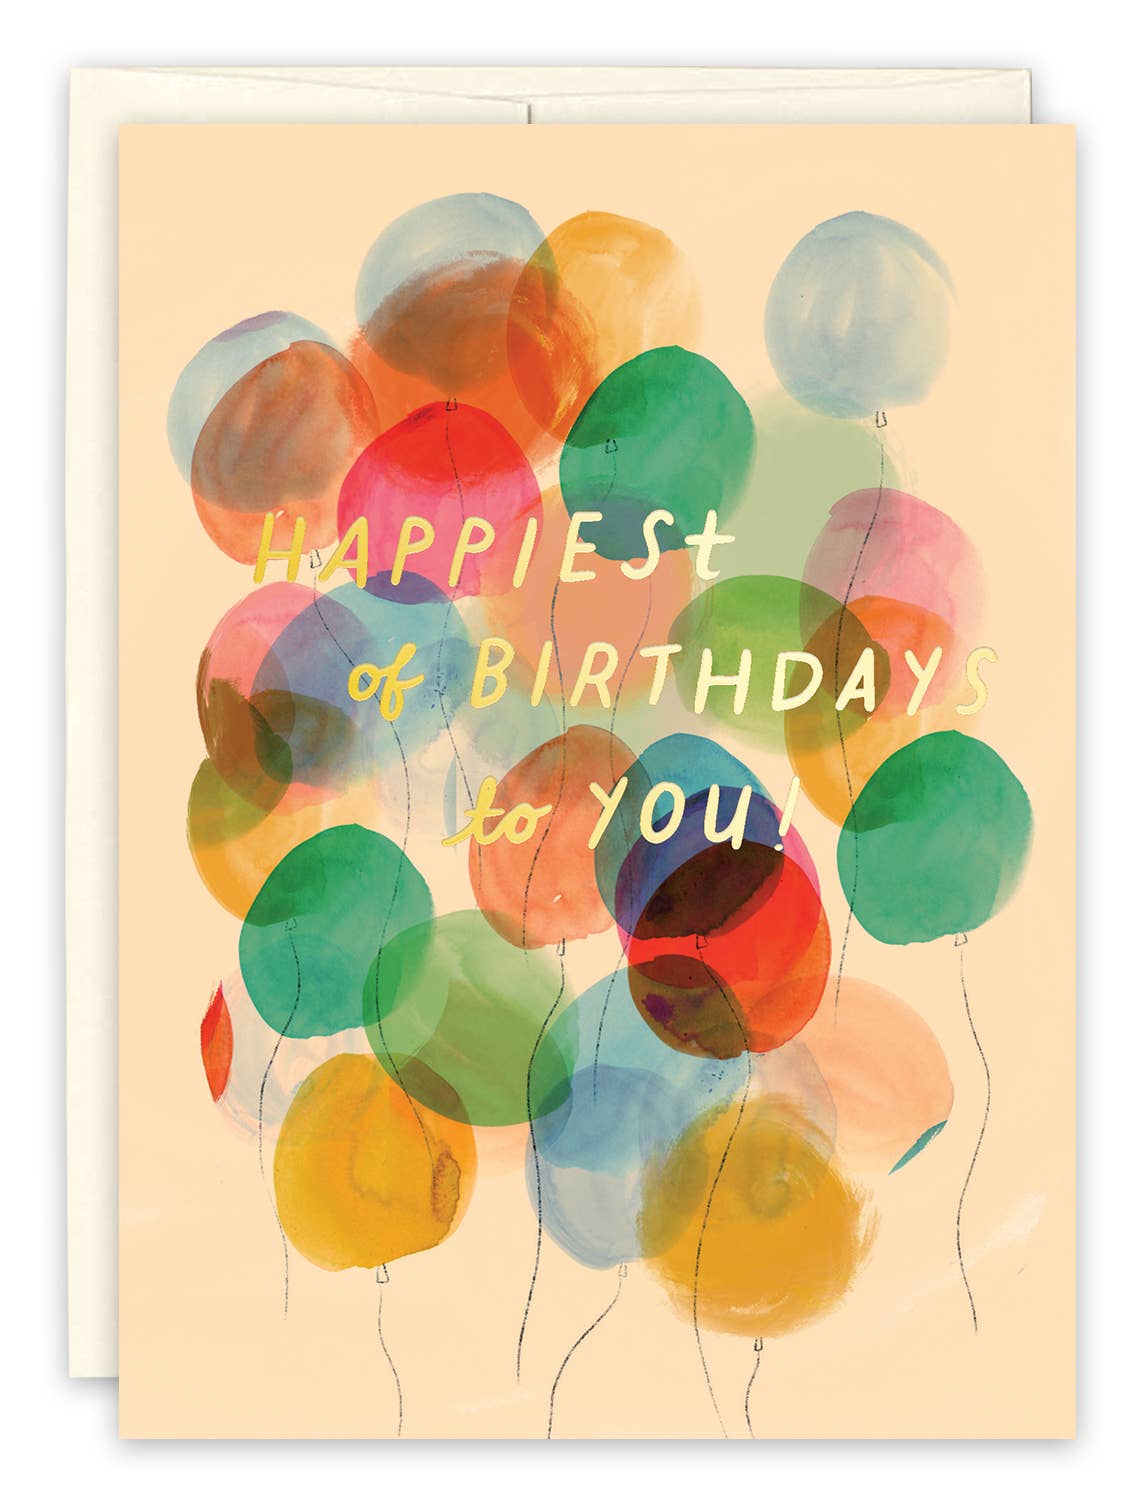 SALE! Balloons "Happiest of Birthdays to You" Birthday Card